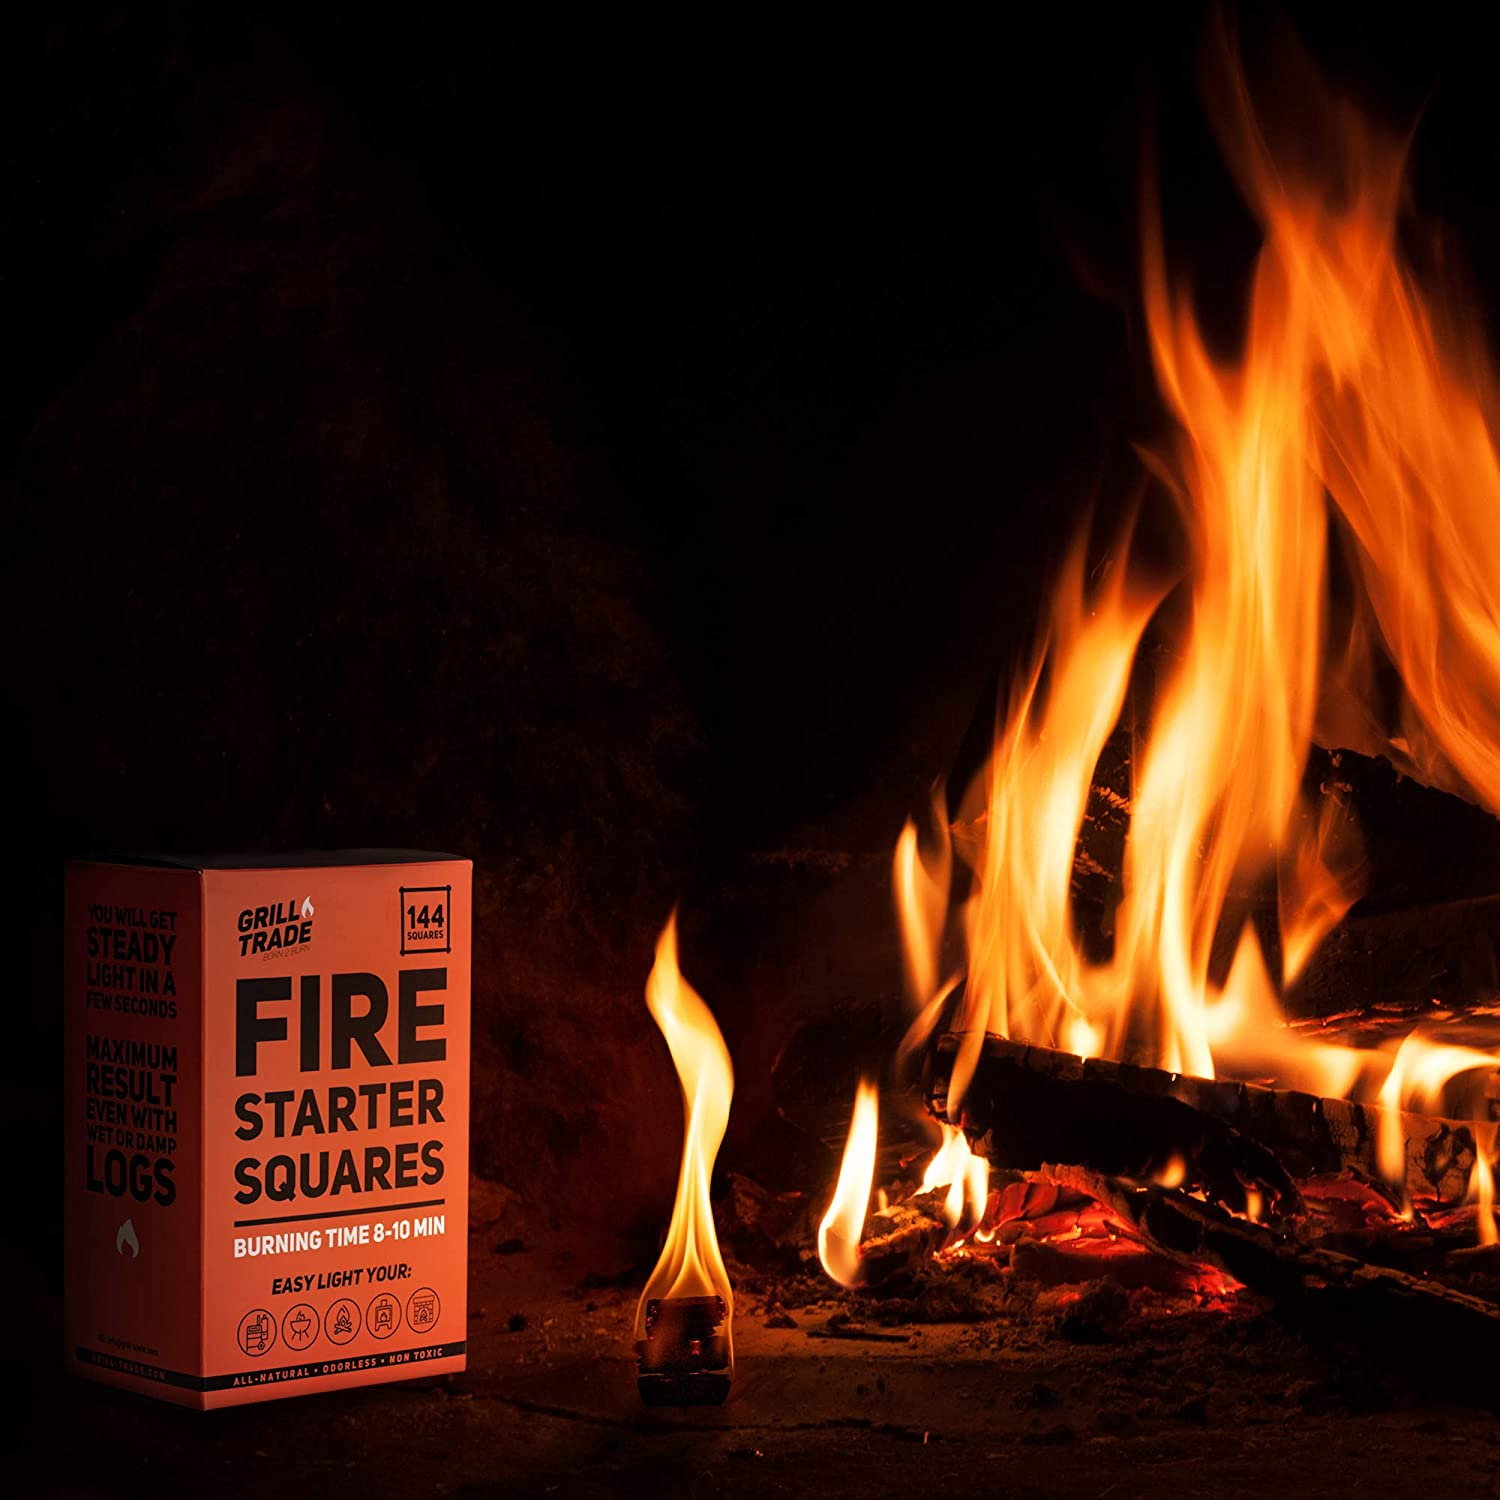 Fire Starter Squares 144, Easy Burn Your BBQ Grill, Camping Fire, Wood Stove, Smoker Pellets, Lump Charcoal, Fireplace -- Fire Cubes Are the Best Barbeque Accessories -- 100% All Natural